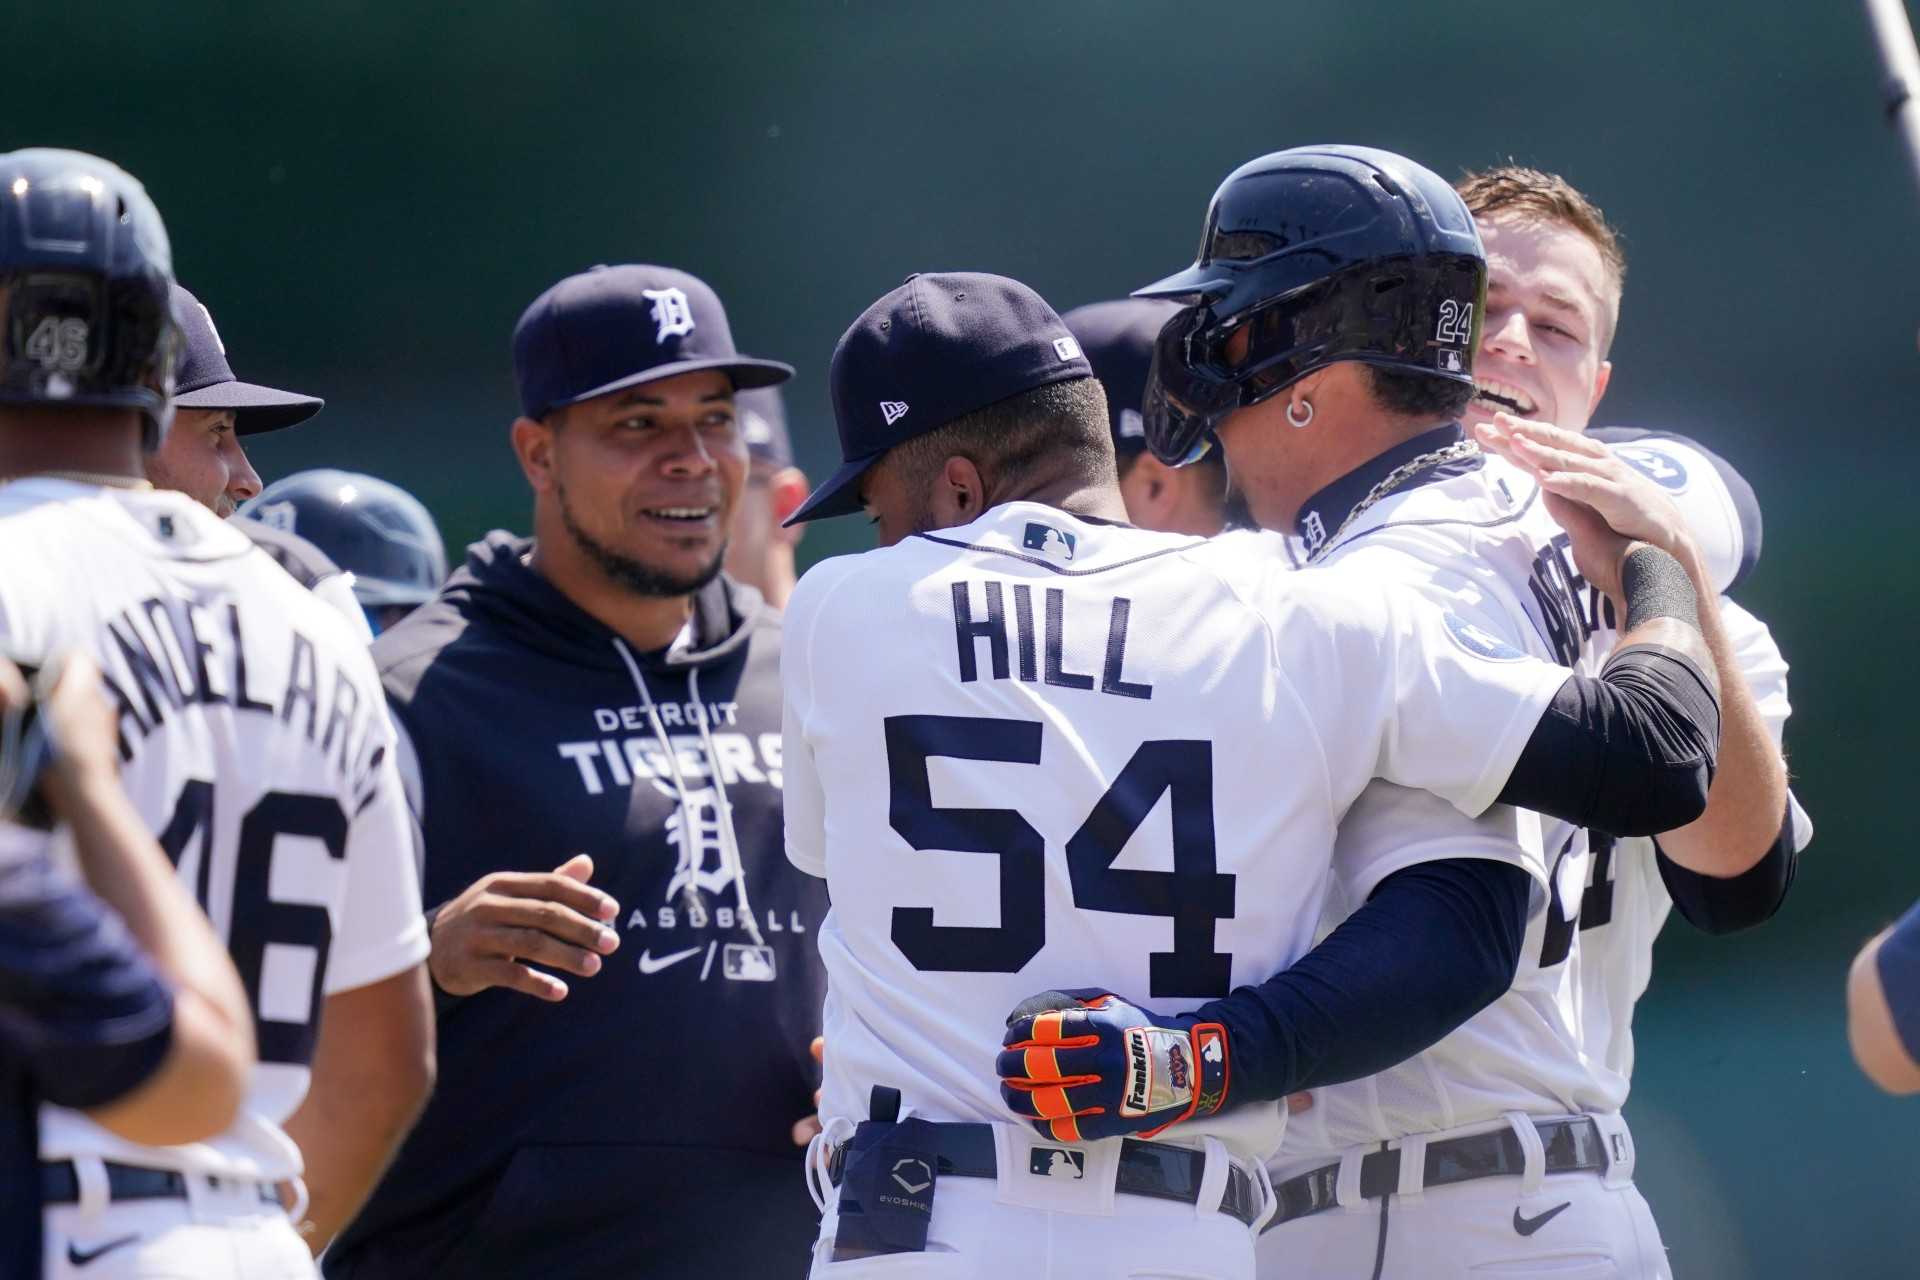 April 23, 2022: Tigers' Miguel Cabrera joins the 3,000-hit club